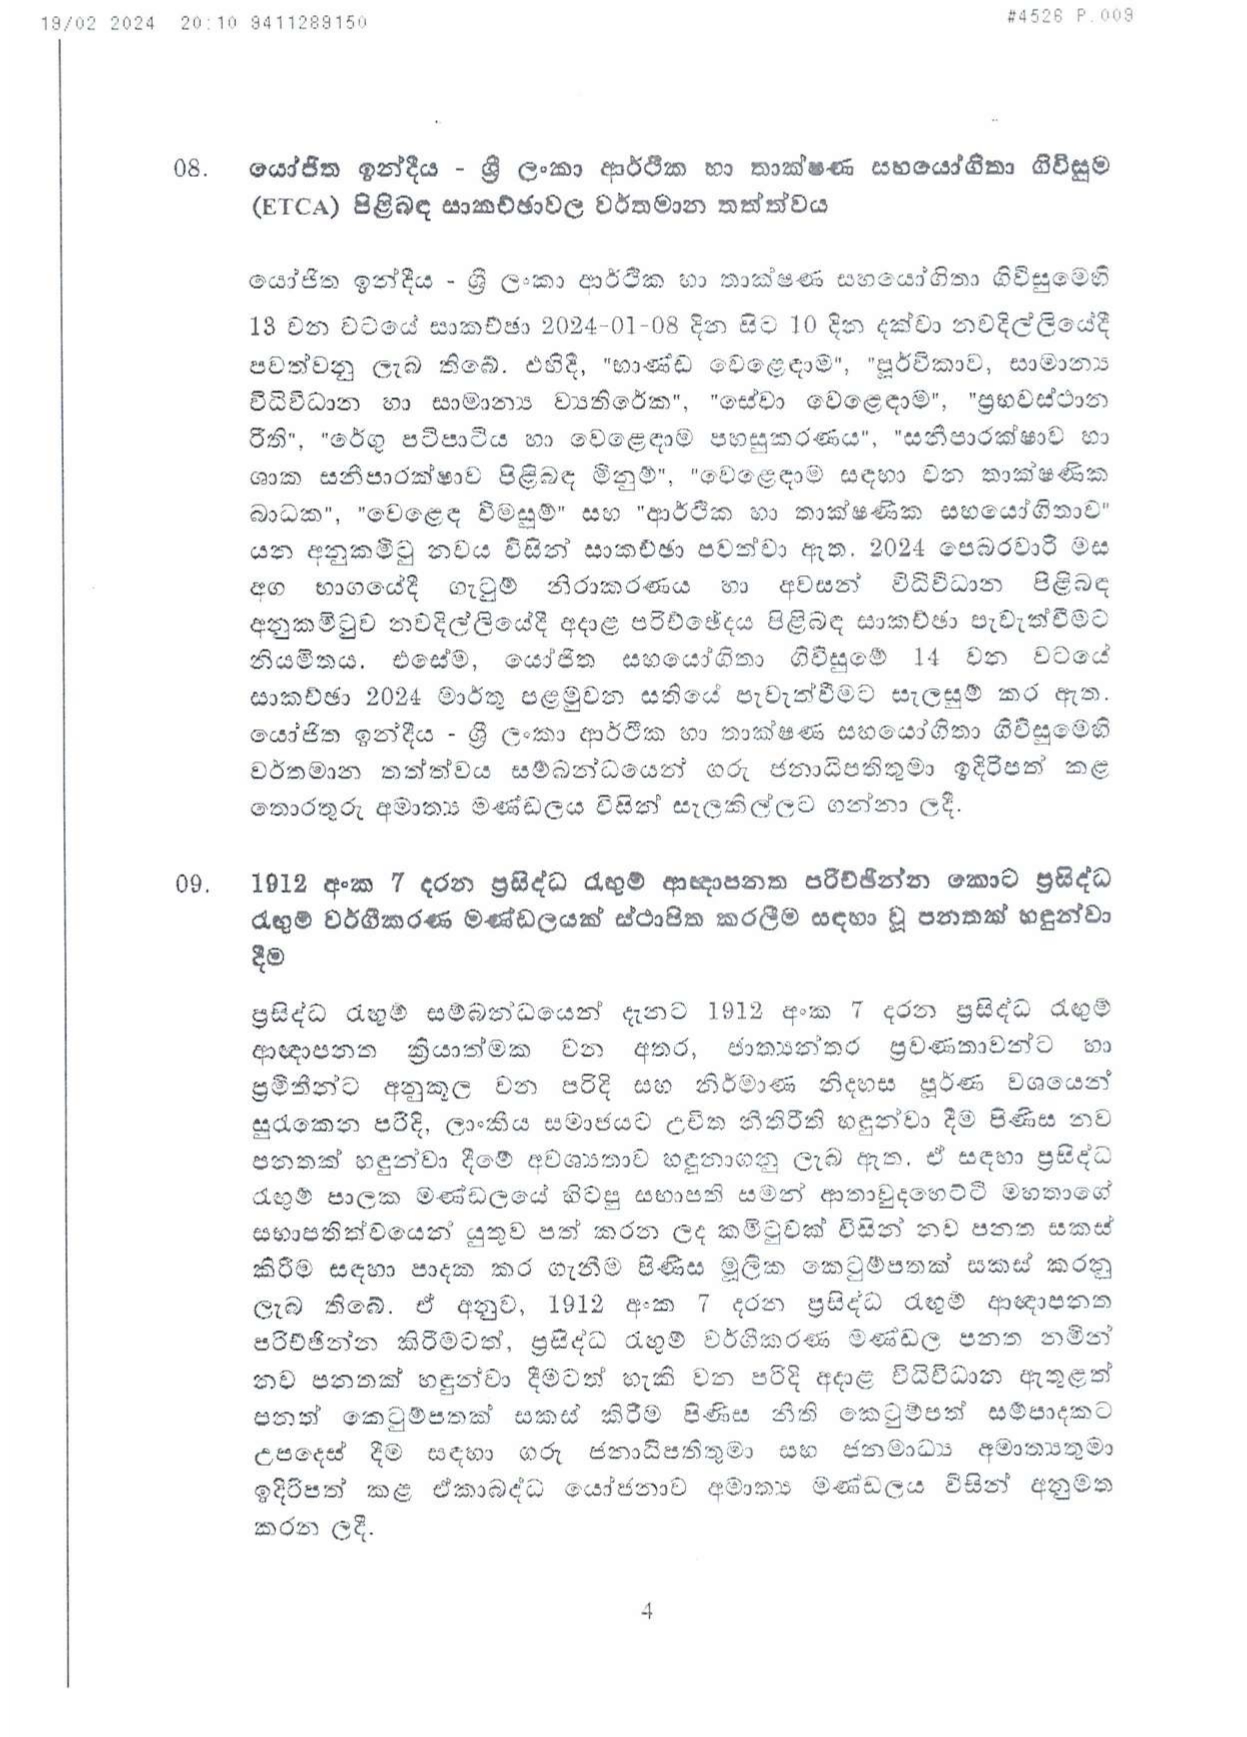 Cabinet Decisions on 19.02.2024 Merged 1 page 00041